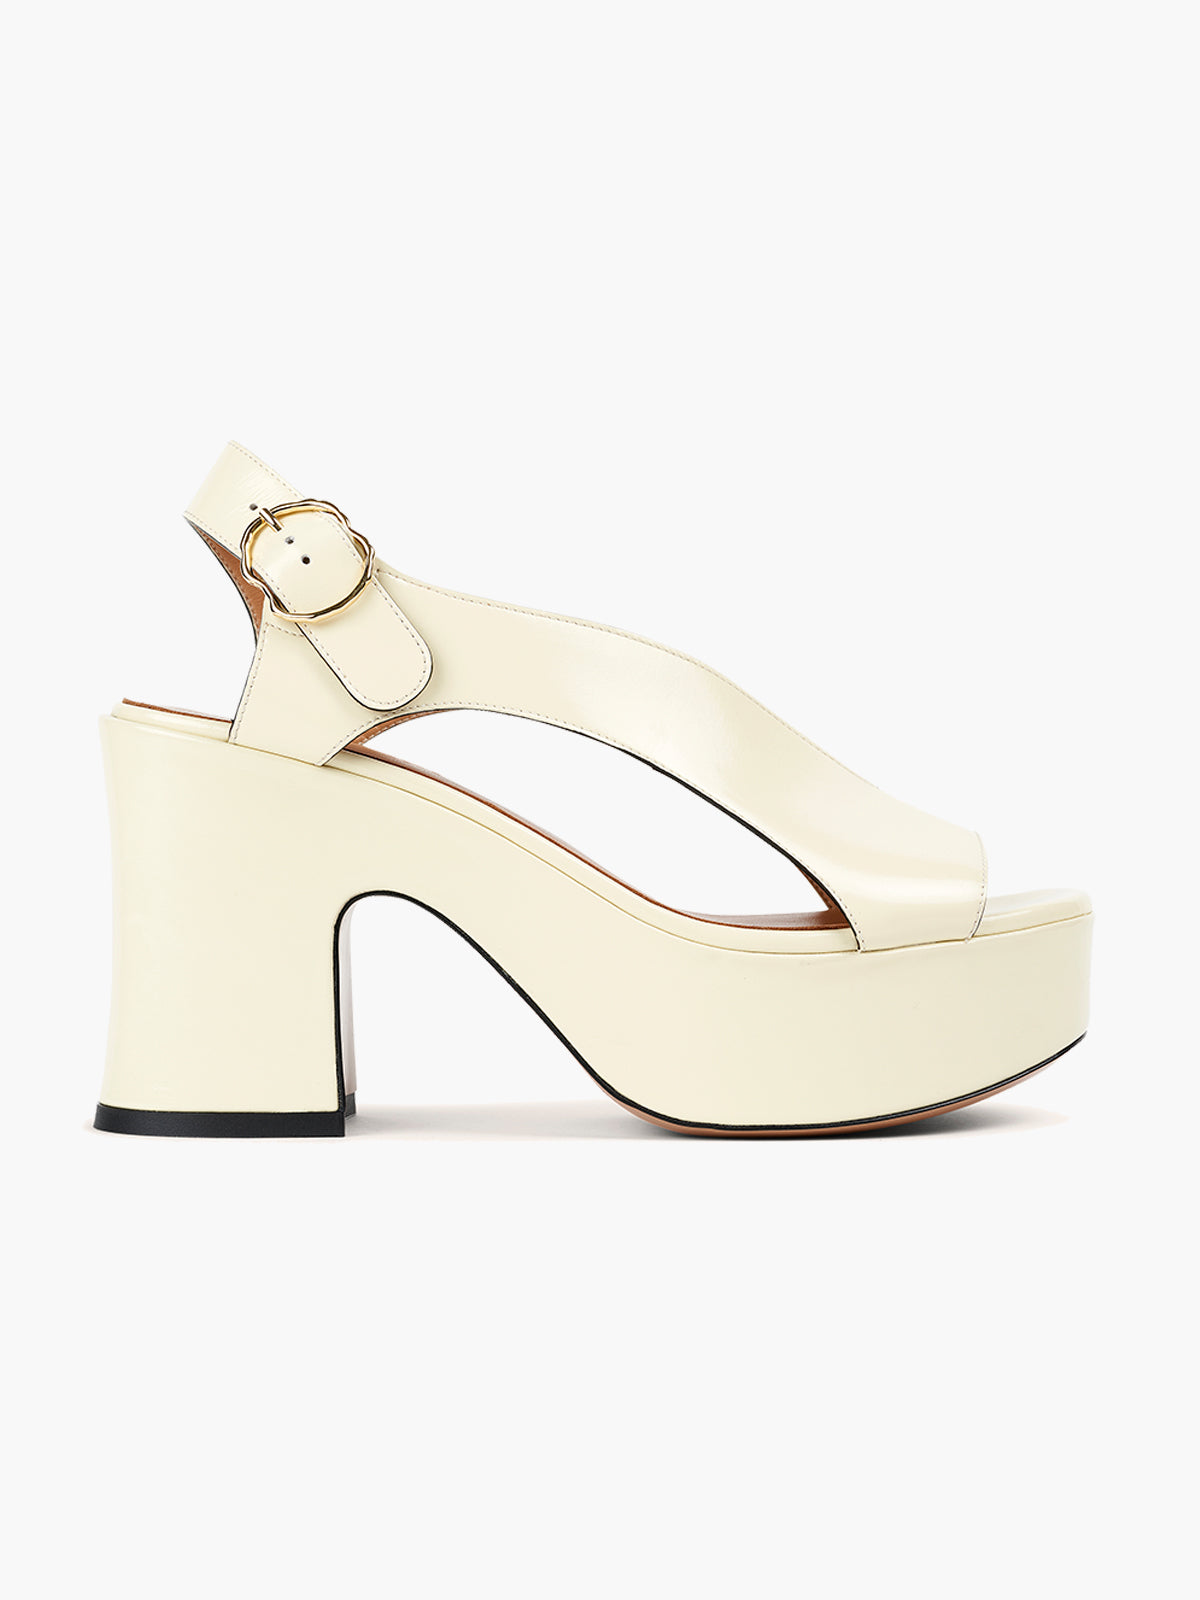 Taxi Sandals | White Semi Patent Leather